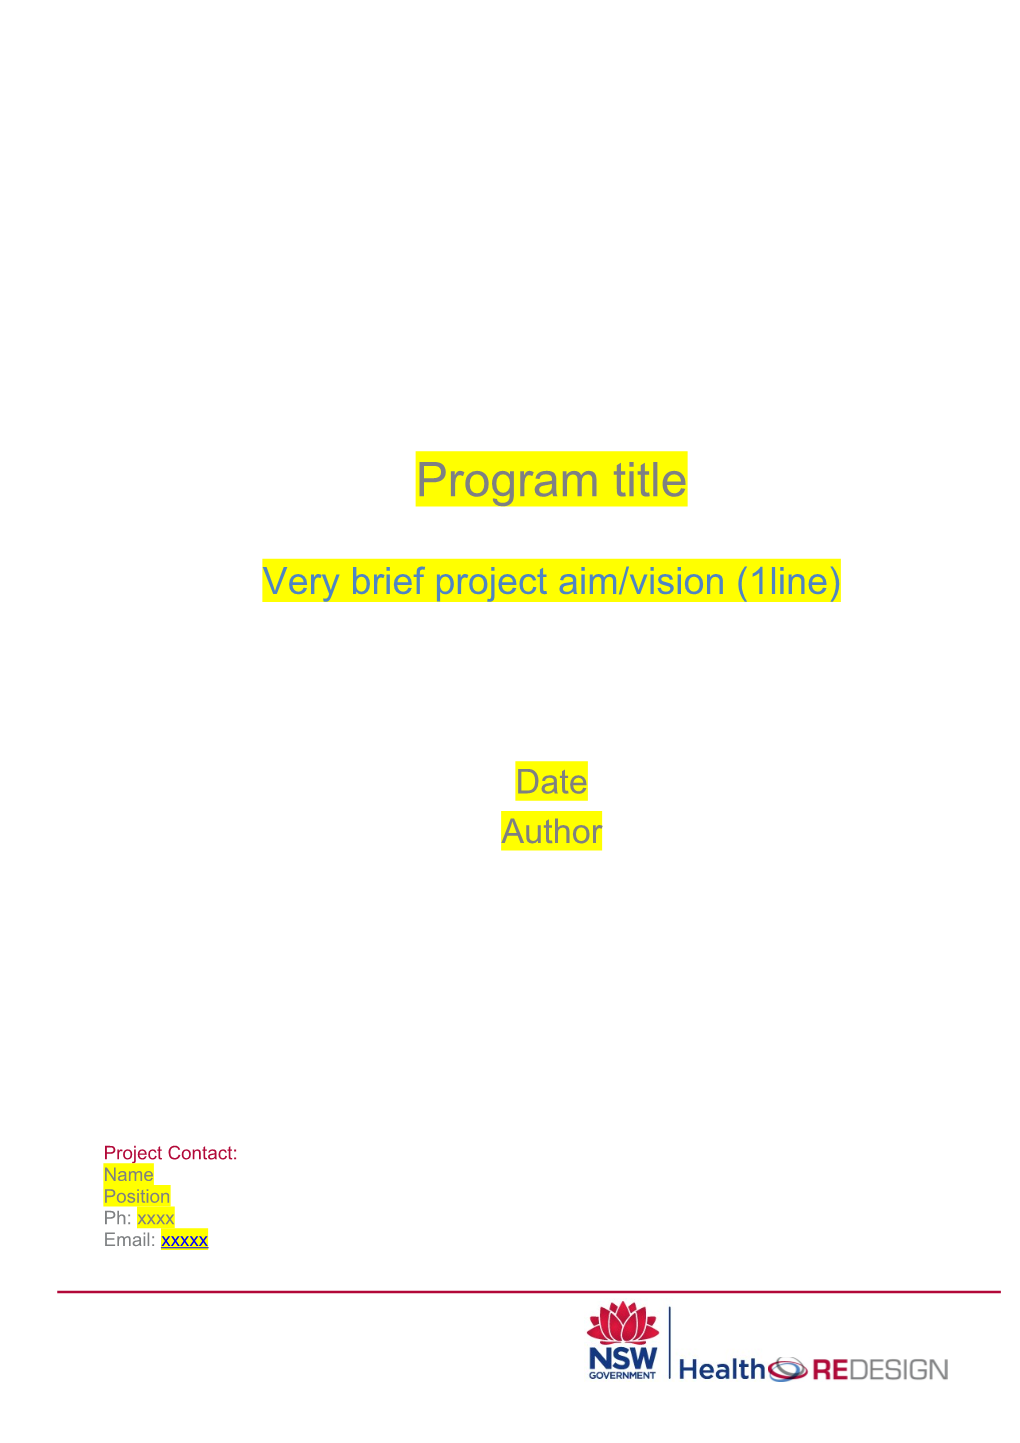 Project Plan Template - Very Brief Project Aim/Vision